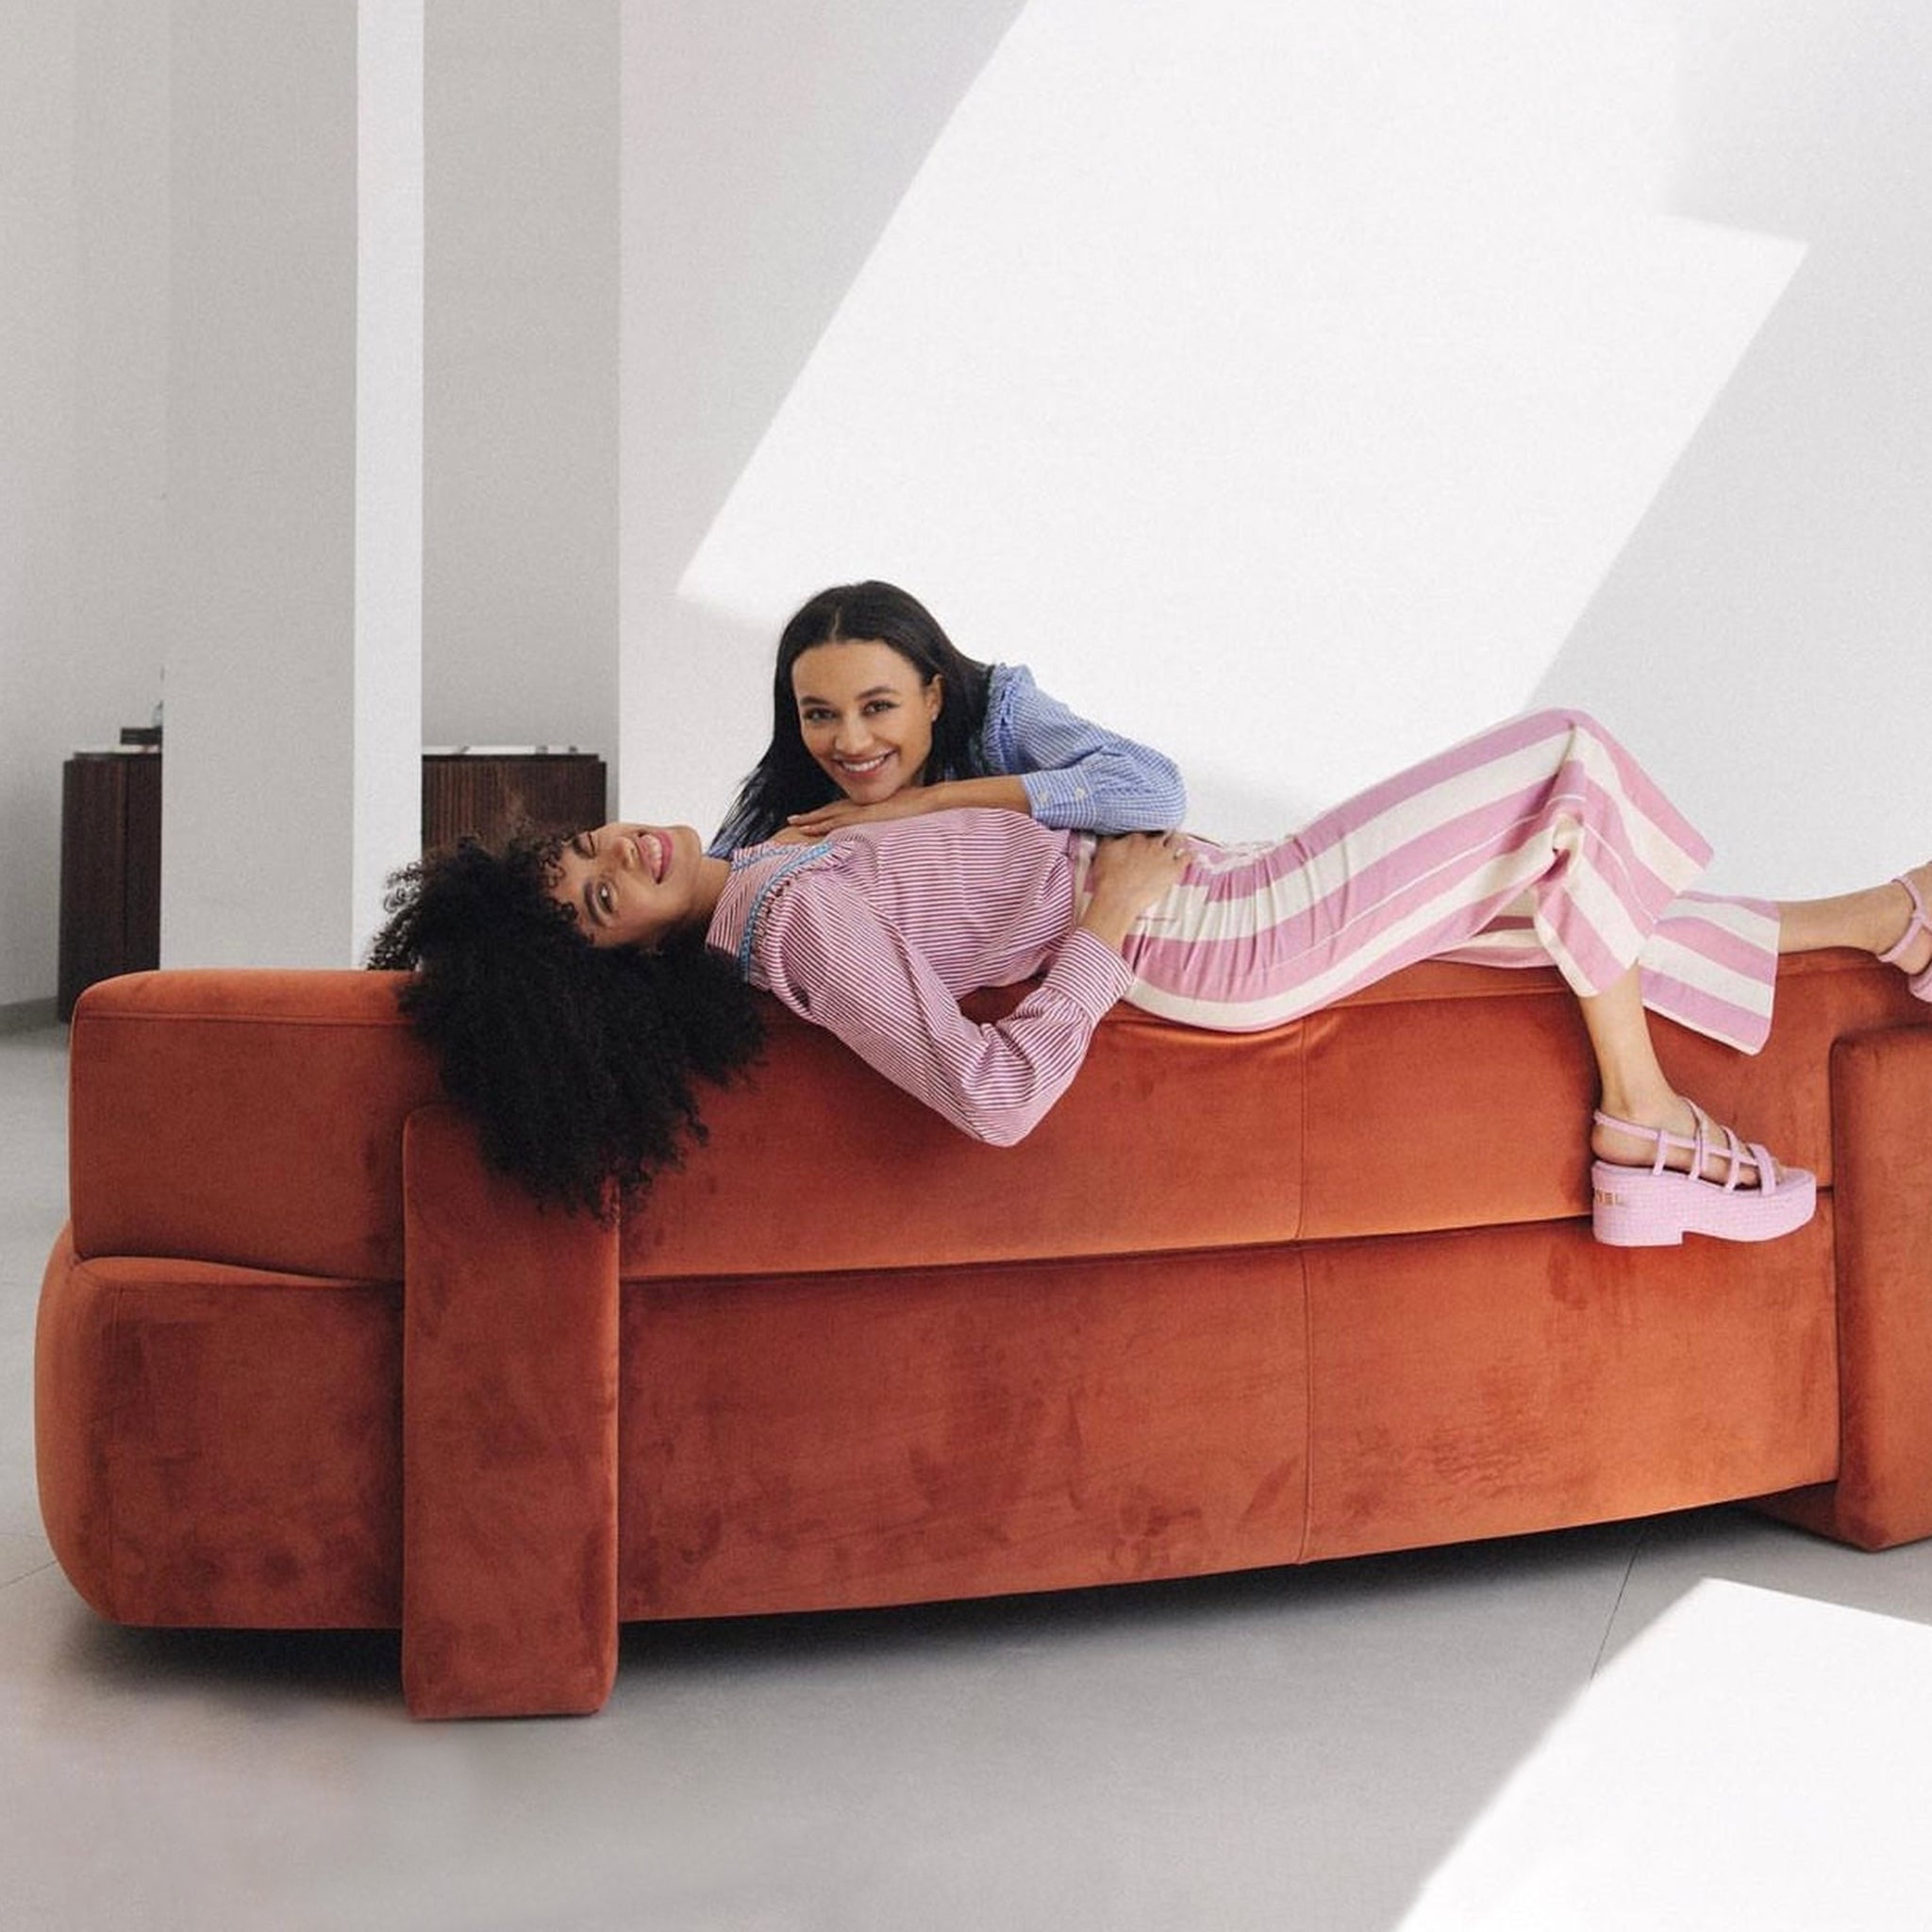 Two women laughing and lounging on an orange sofa in a modern living room